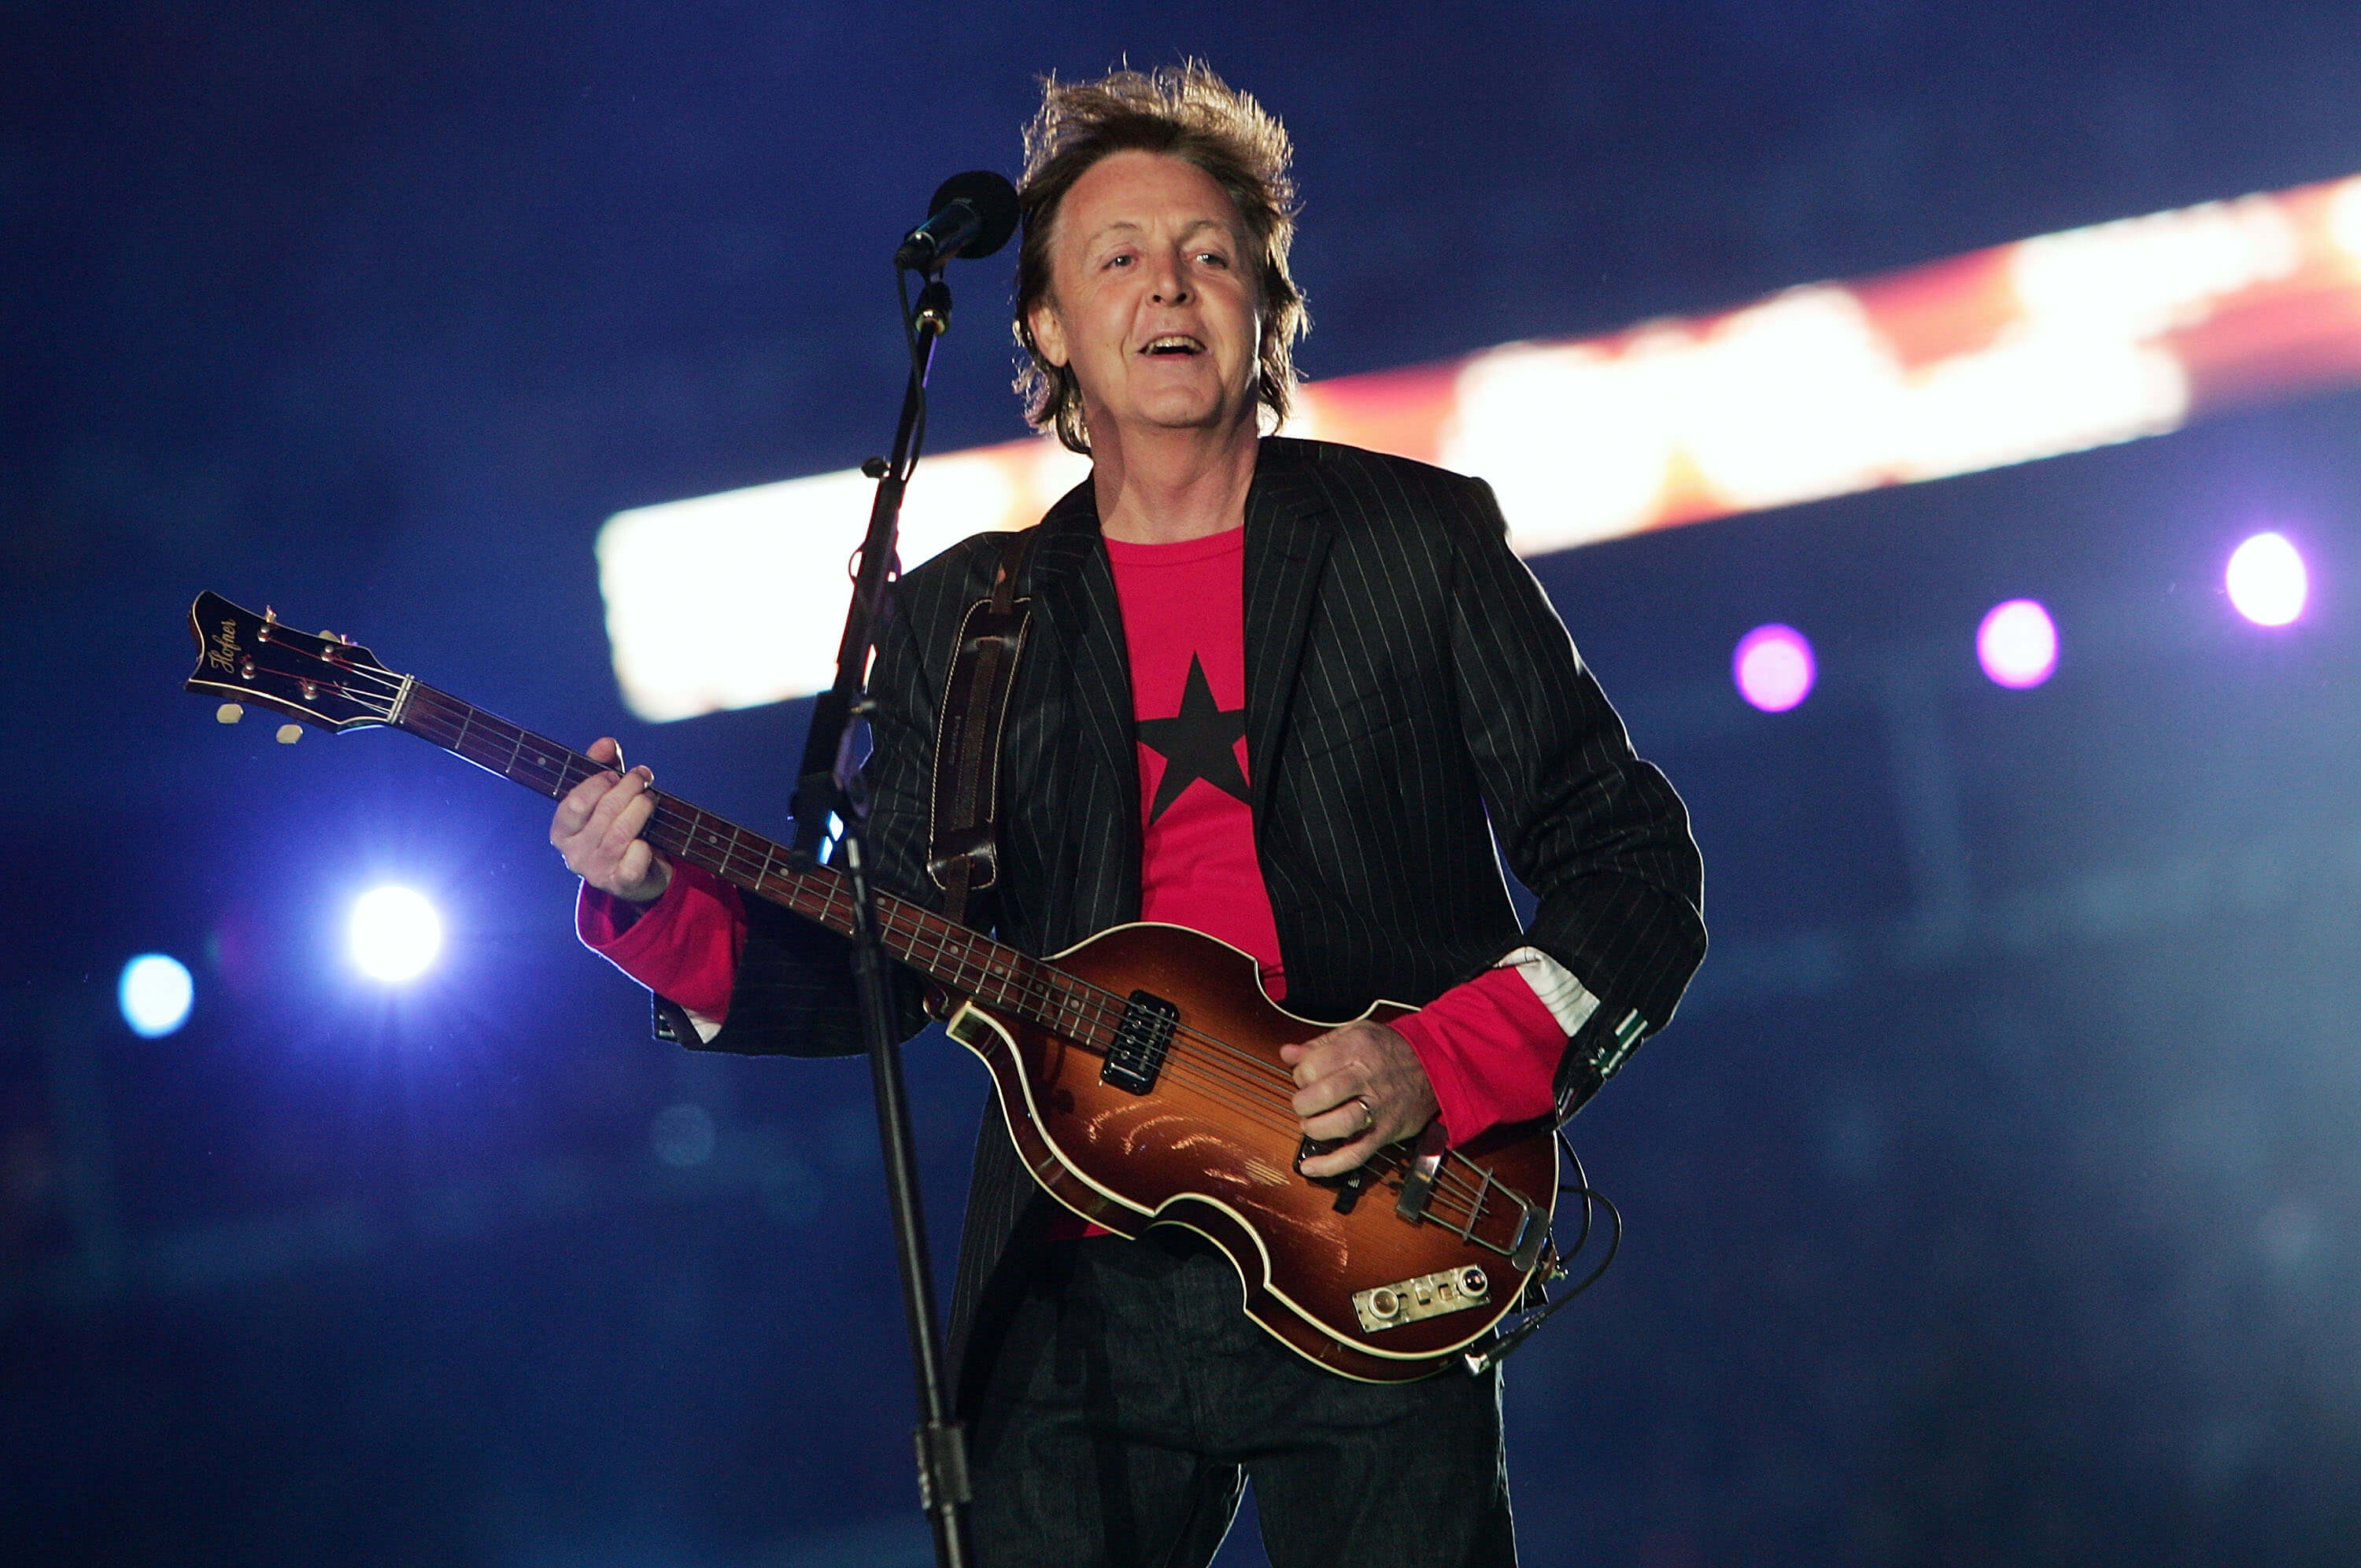 Paul McCartney performs during the Super Bowl XXXIX halftime show at Alltel Stadium